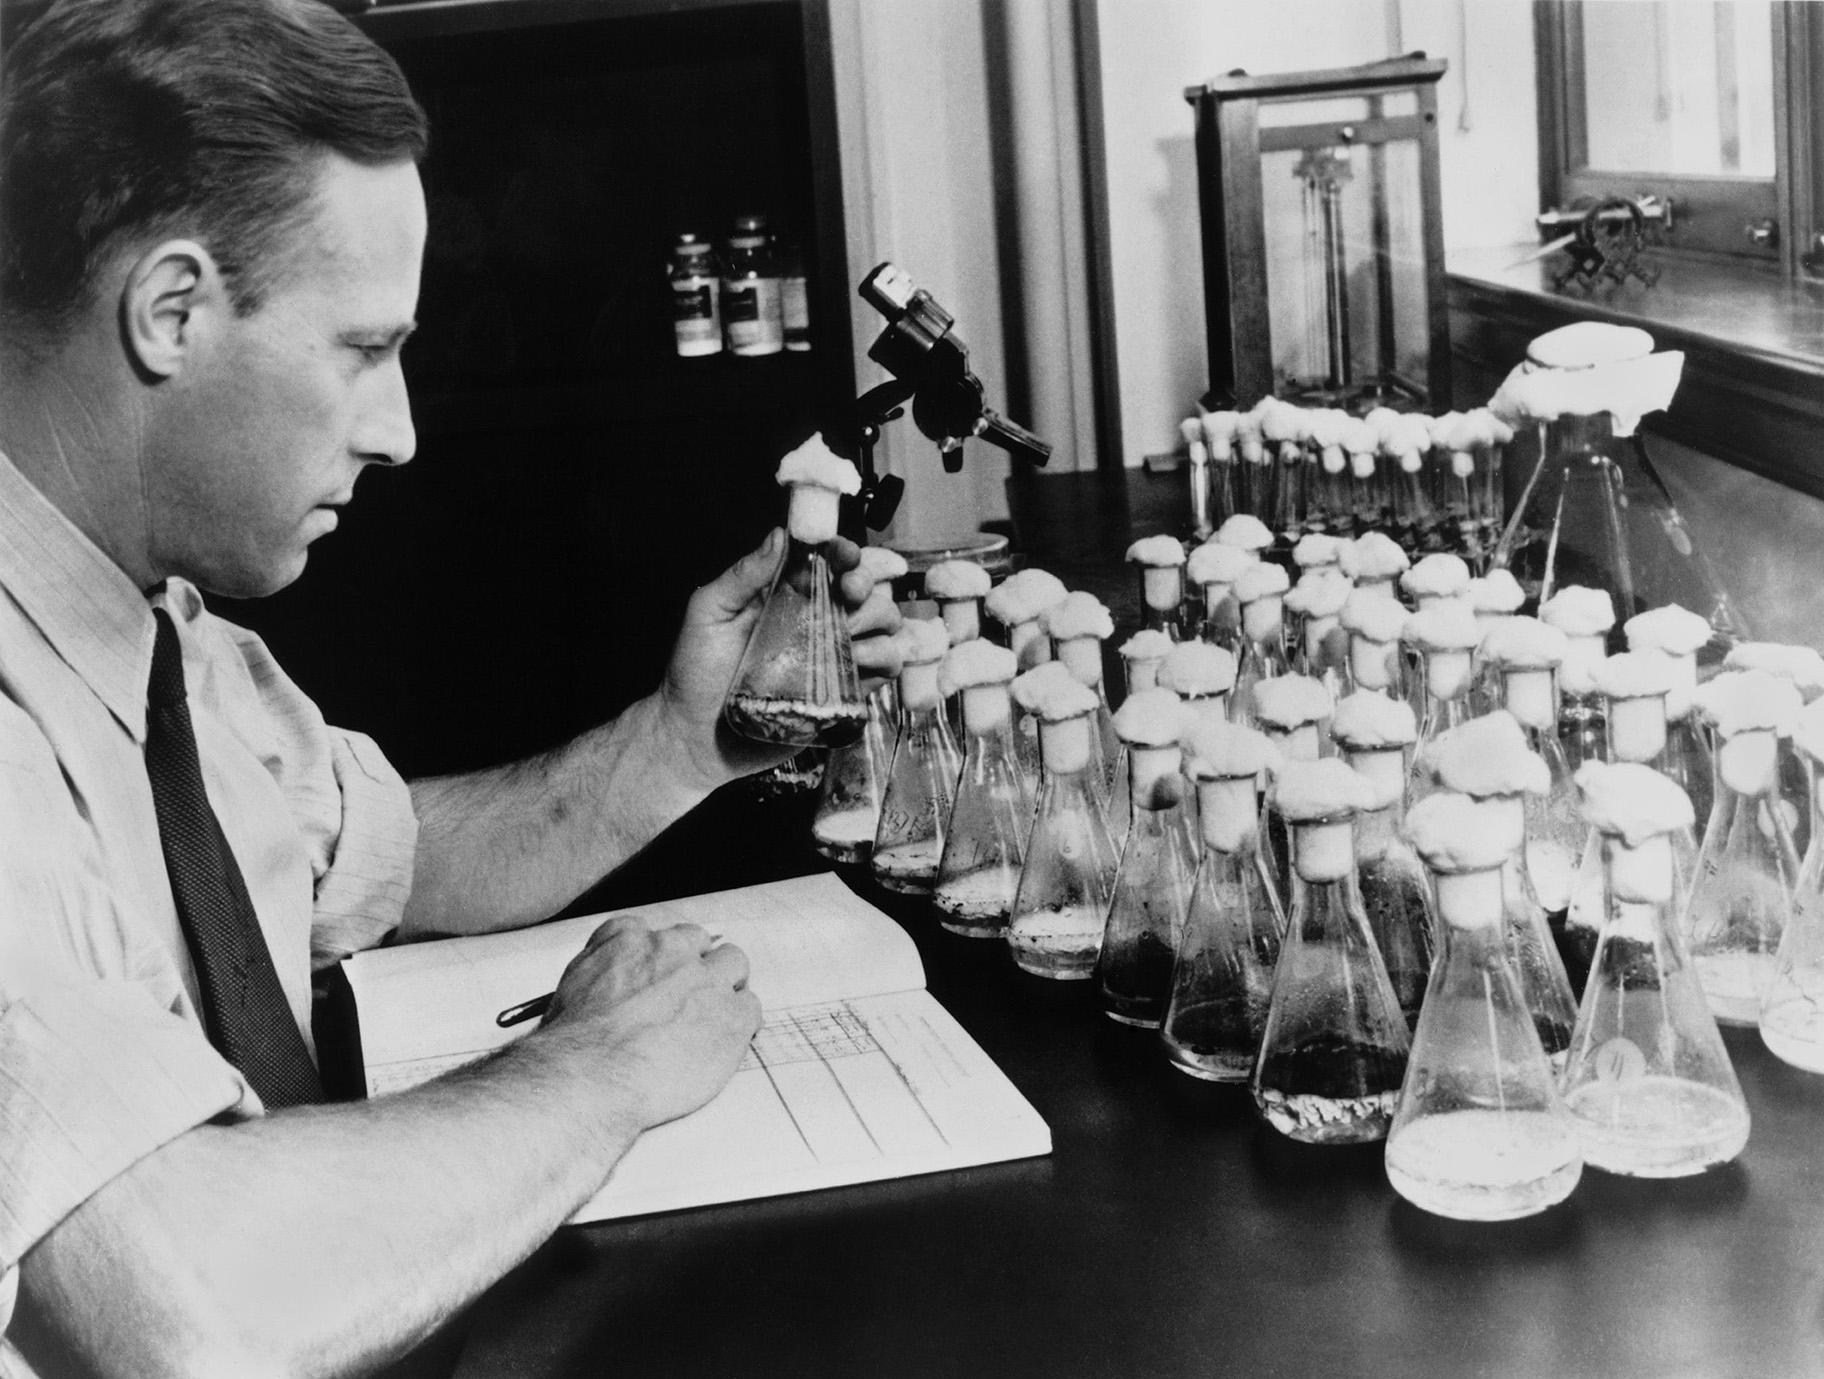 Andrew Moyer, in his Peoria laboratory, discovered the process for mass producing penicillin. (Credit: The Agricultural Research Service, U.S. Department of Agriculture)